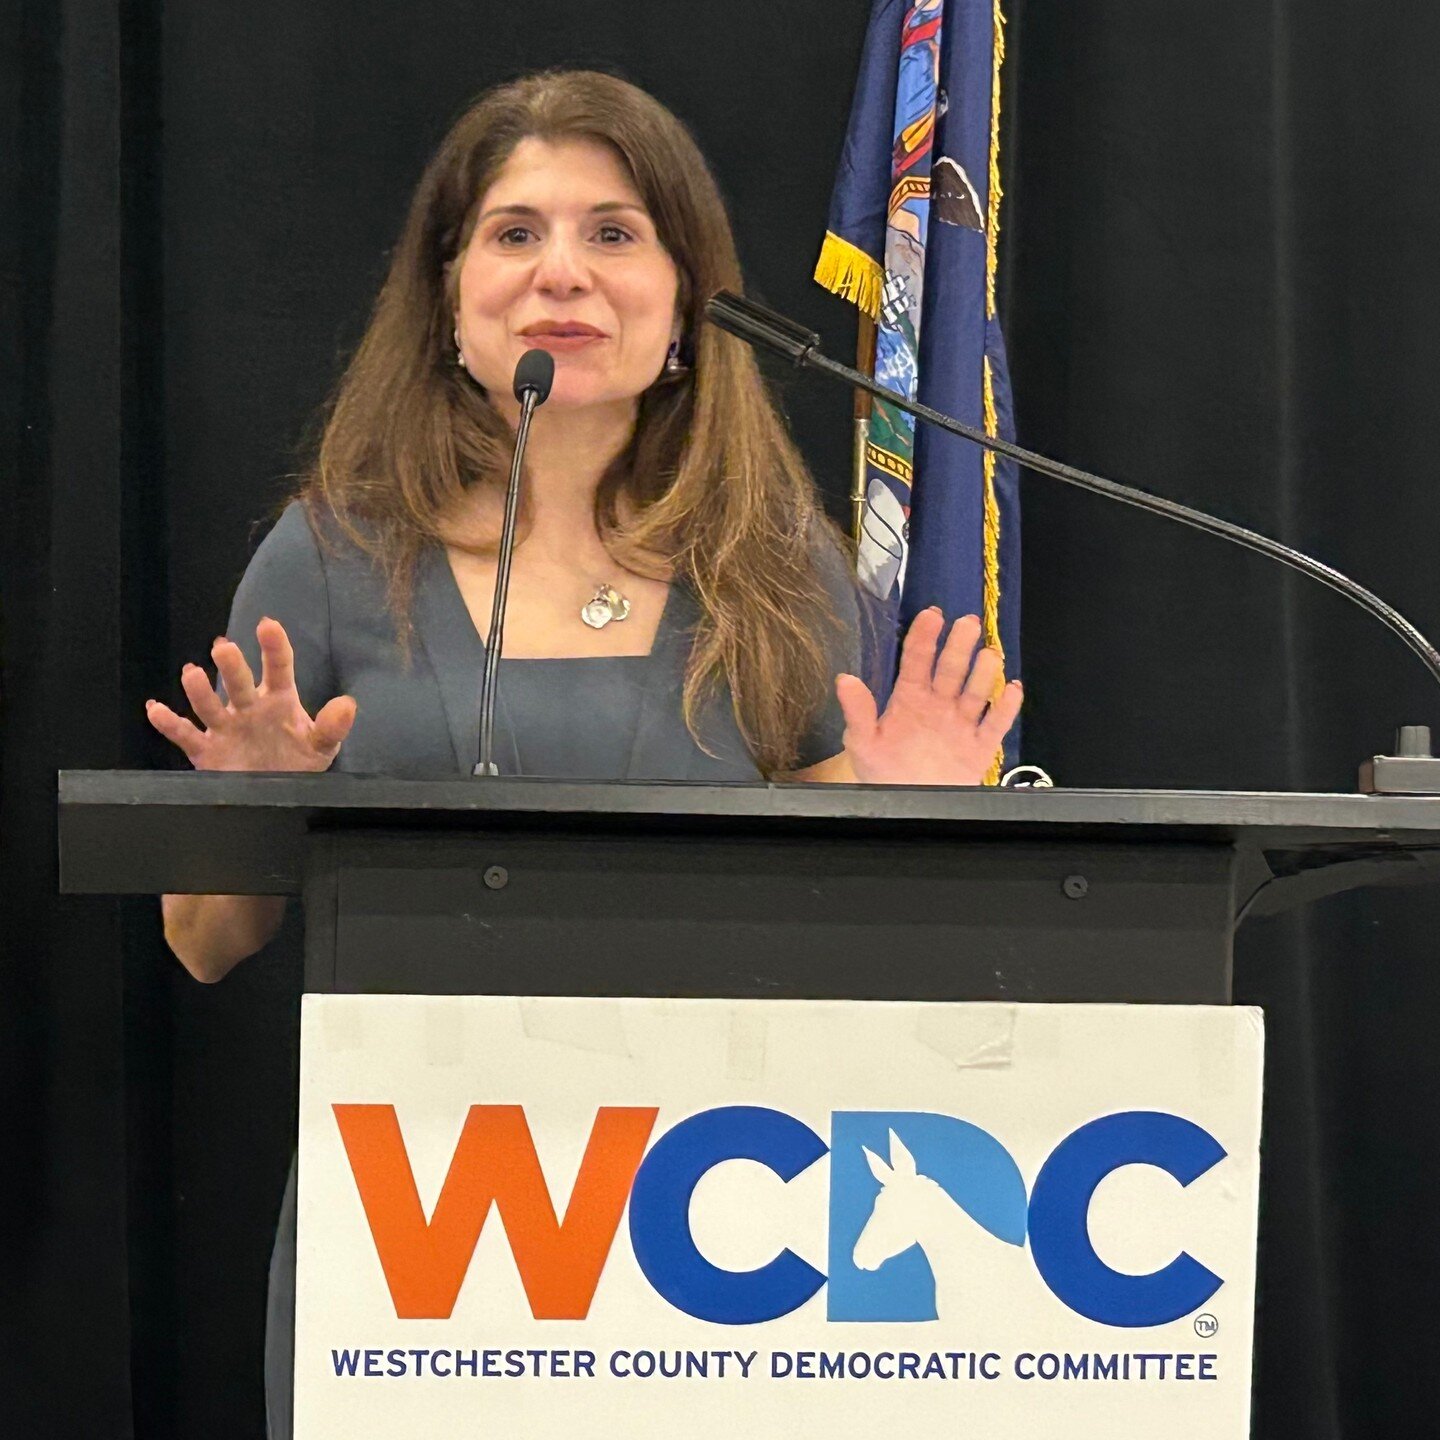 We are so humbled to receive the support of the Westchester County Democratic Committee at this week's Convention! Thank you to the Chairs and District Leaders for nominating us as one of the 3 Family Court candidates!

Be a part of our campaign here